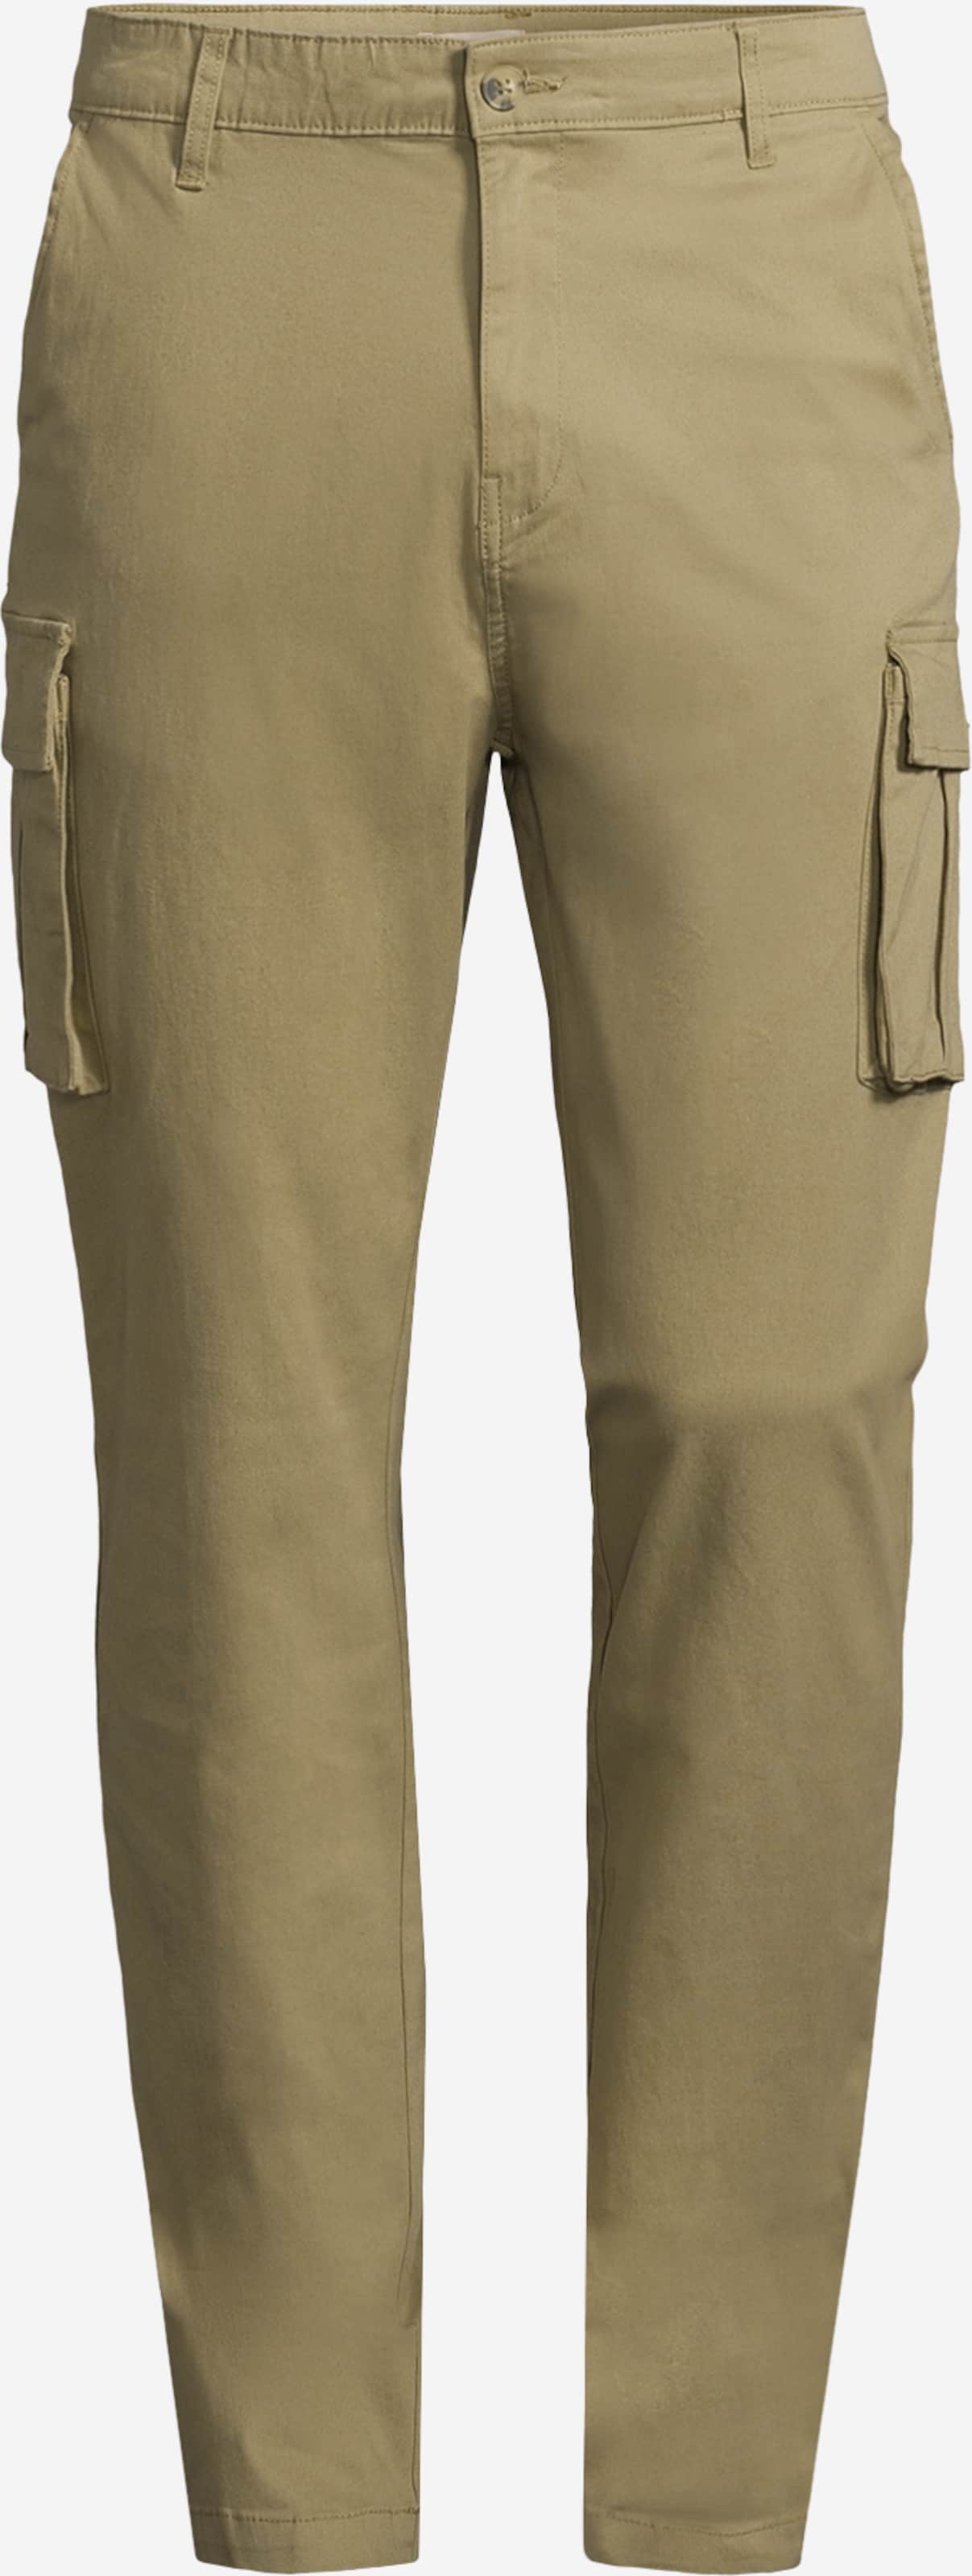 AÉROPOSTALE Tapered Cargo Pants in Khaki